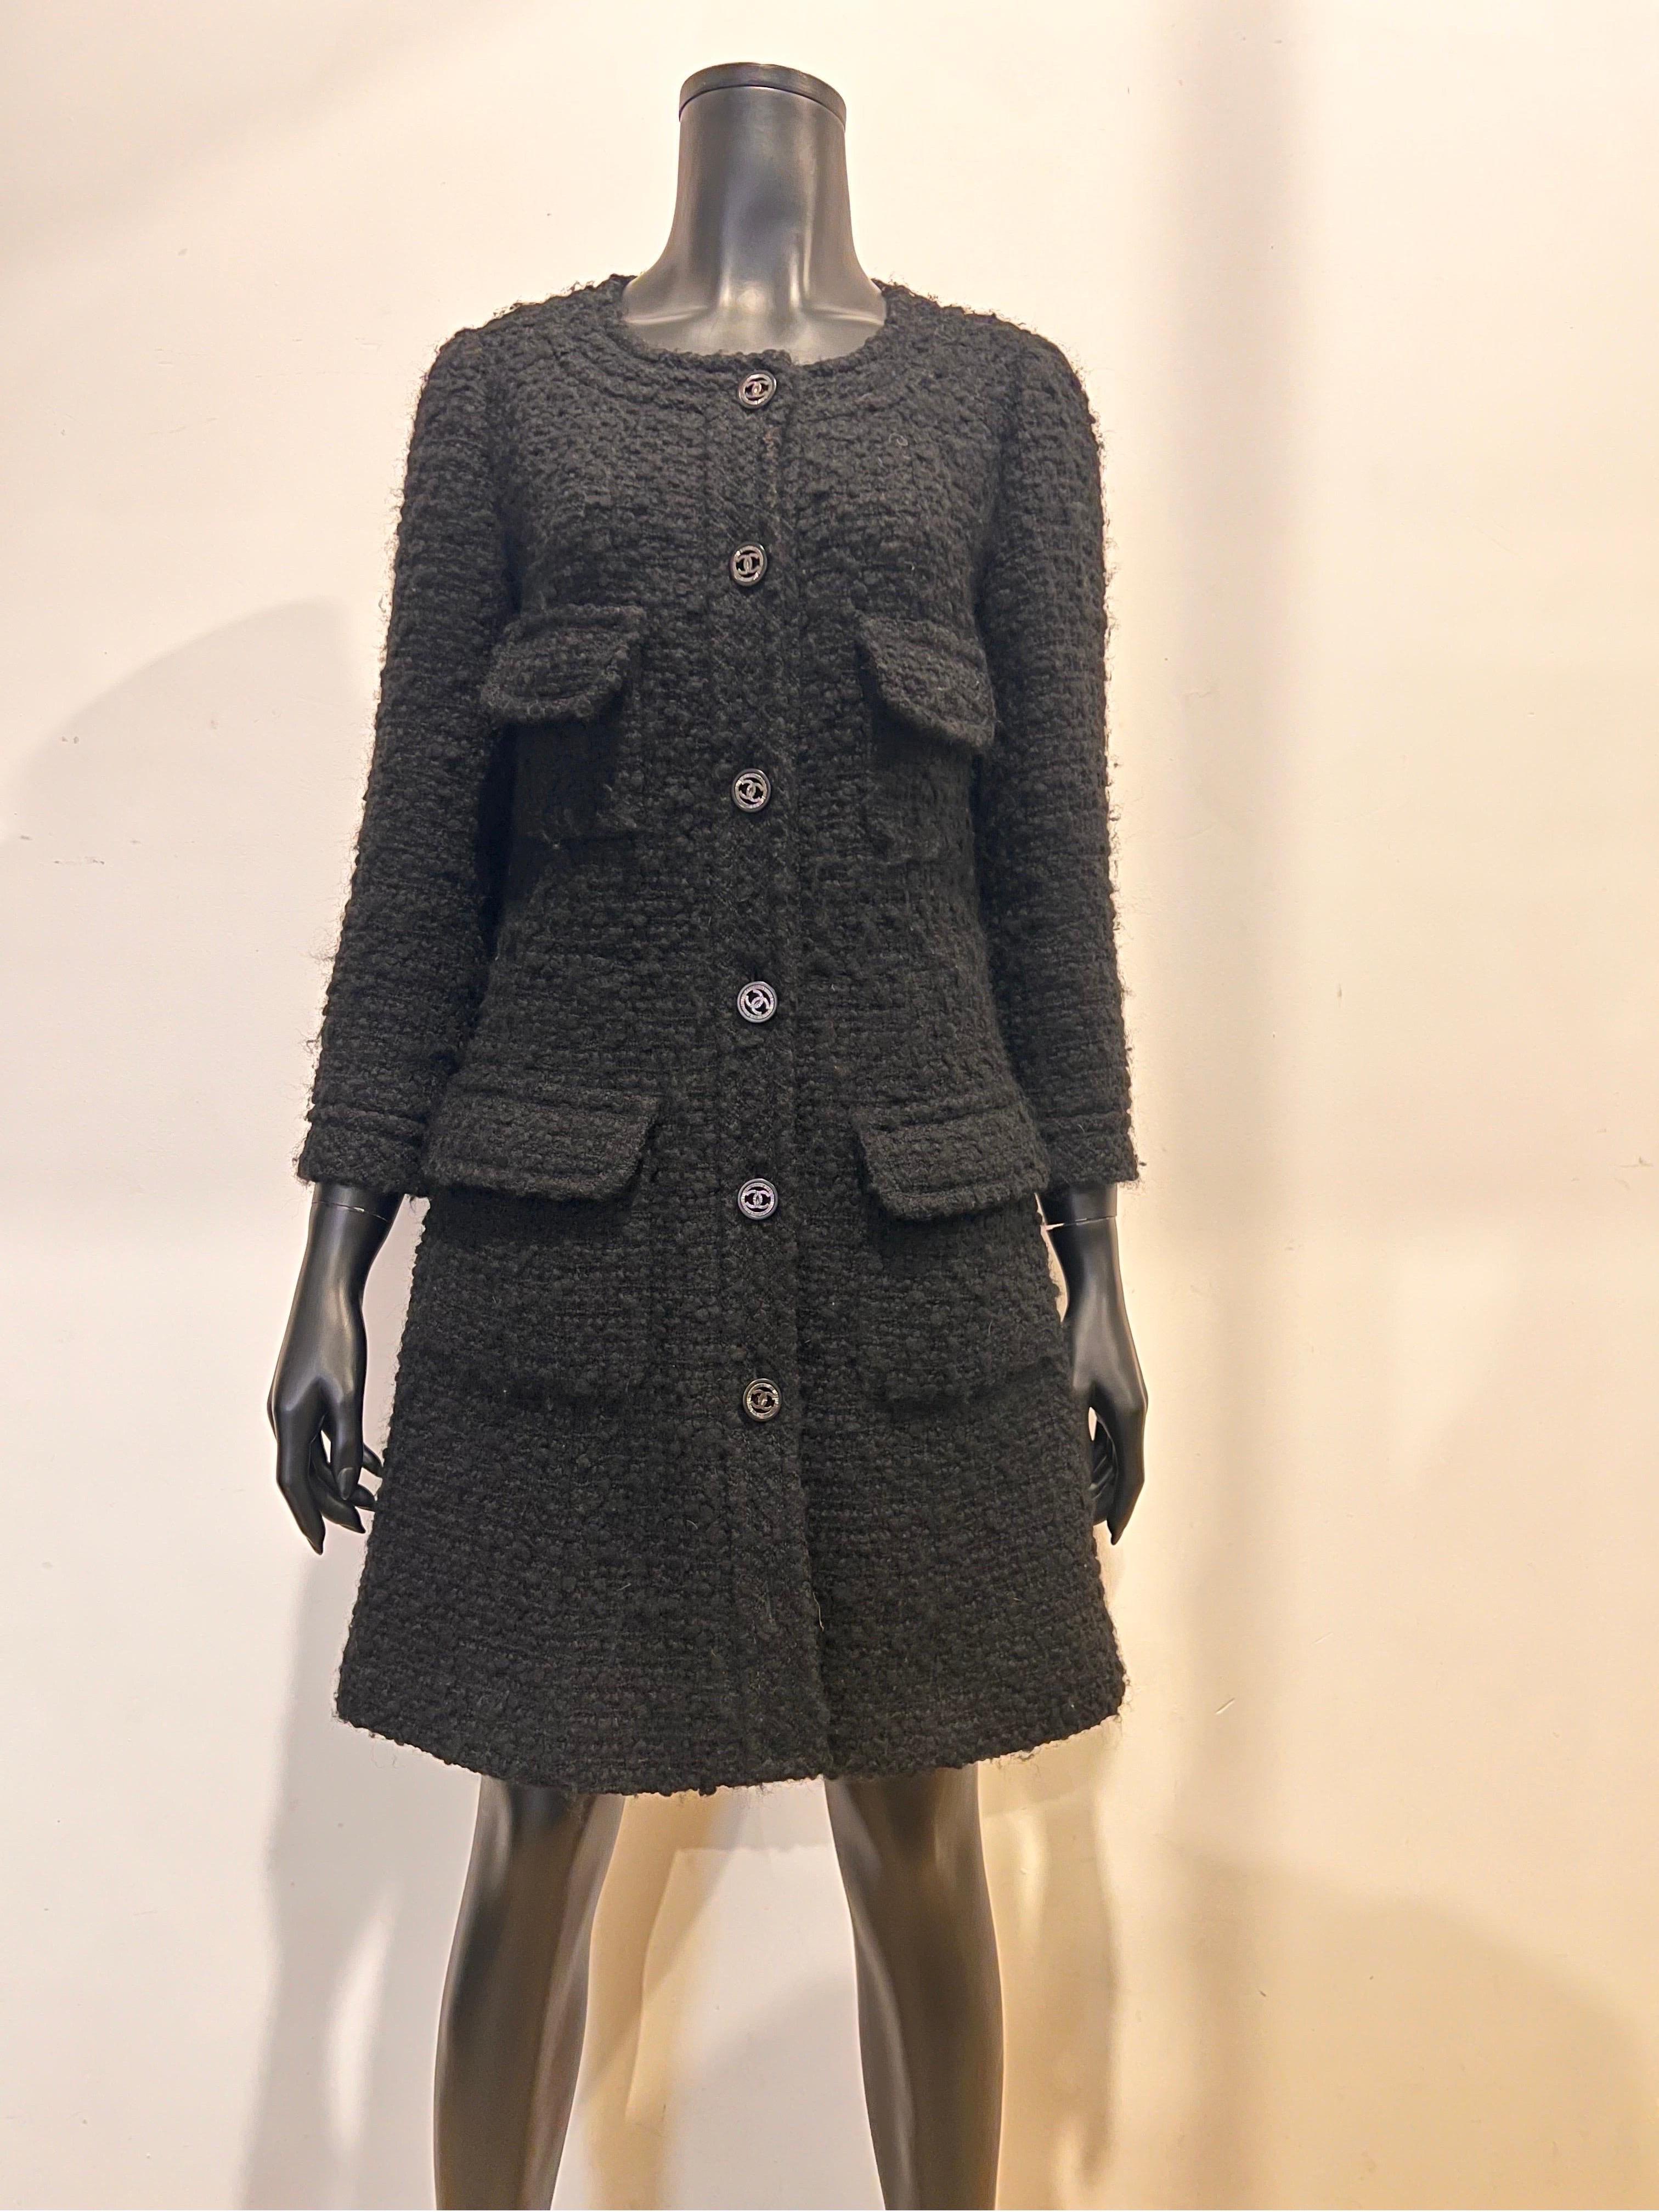 Classic archive Chanel boucle tweed coat dress in black with double C buttons. From the Karl Largefeld era. 2013 Collection.
Size 38. Fully lined and in great condition. 
Model P46625